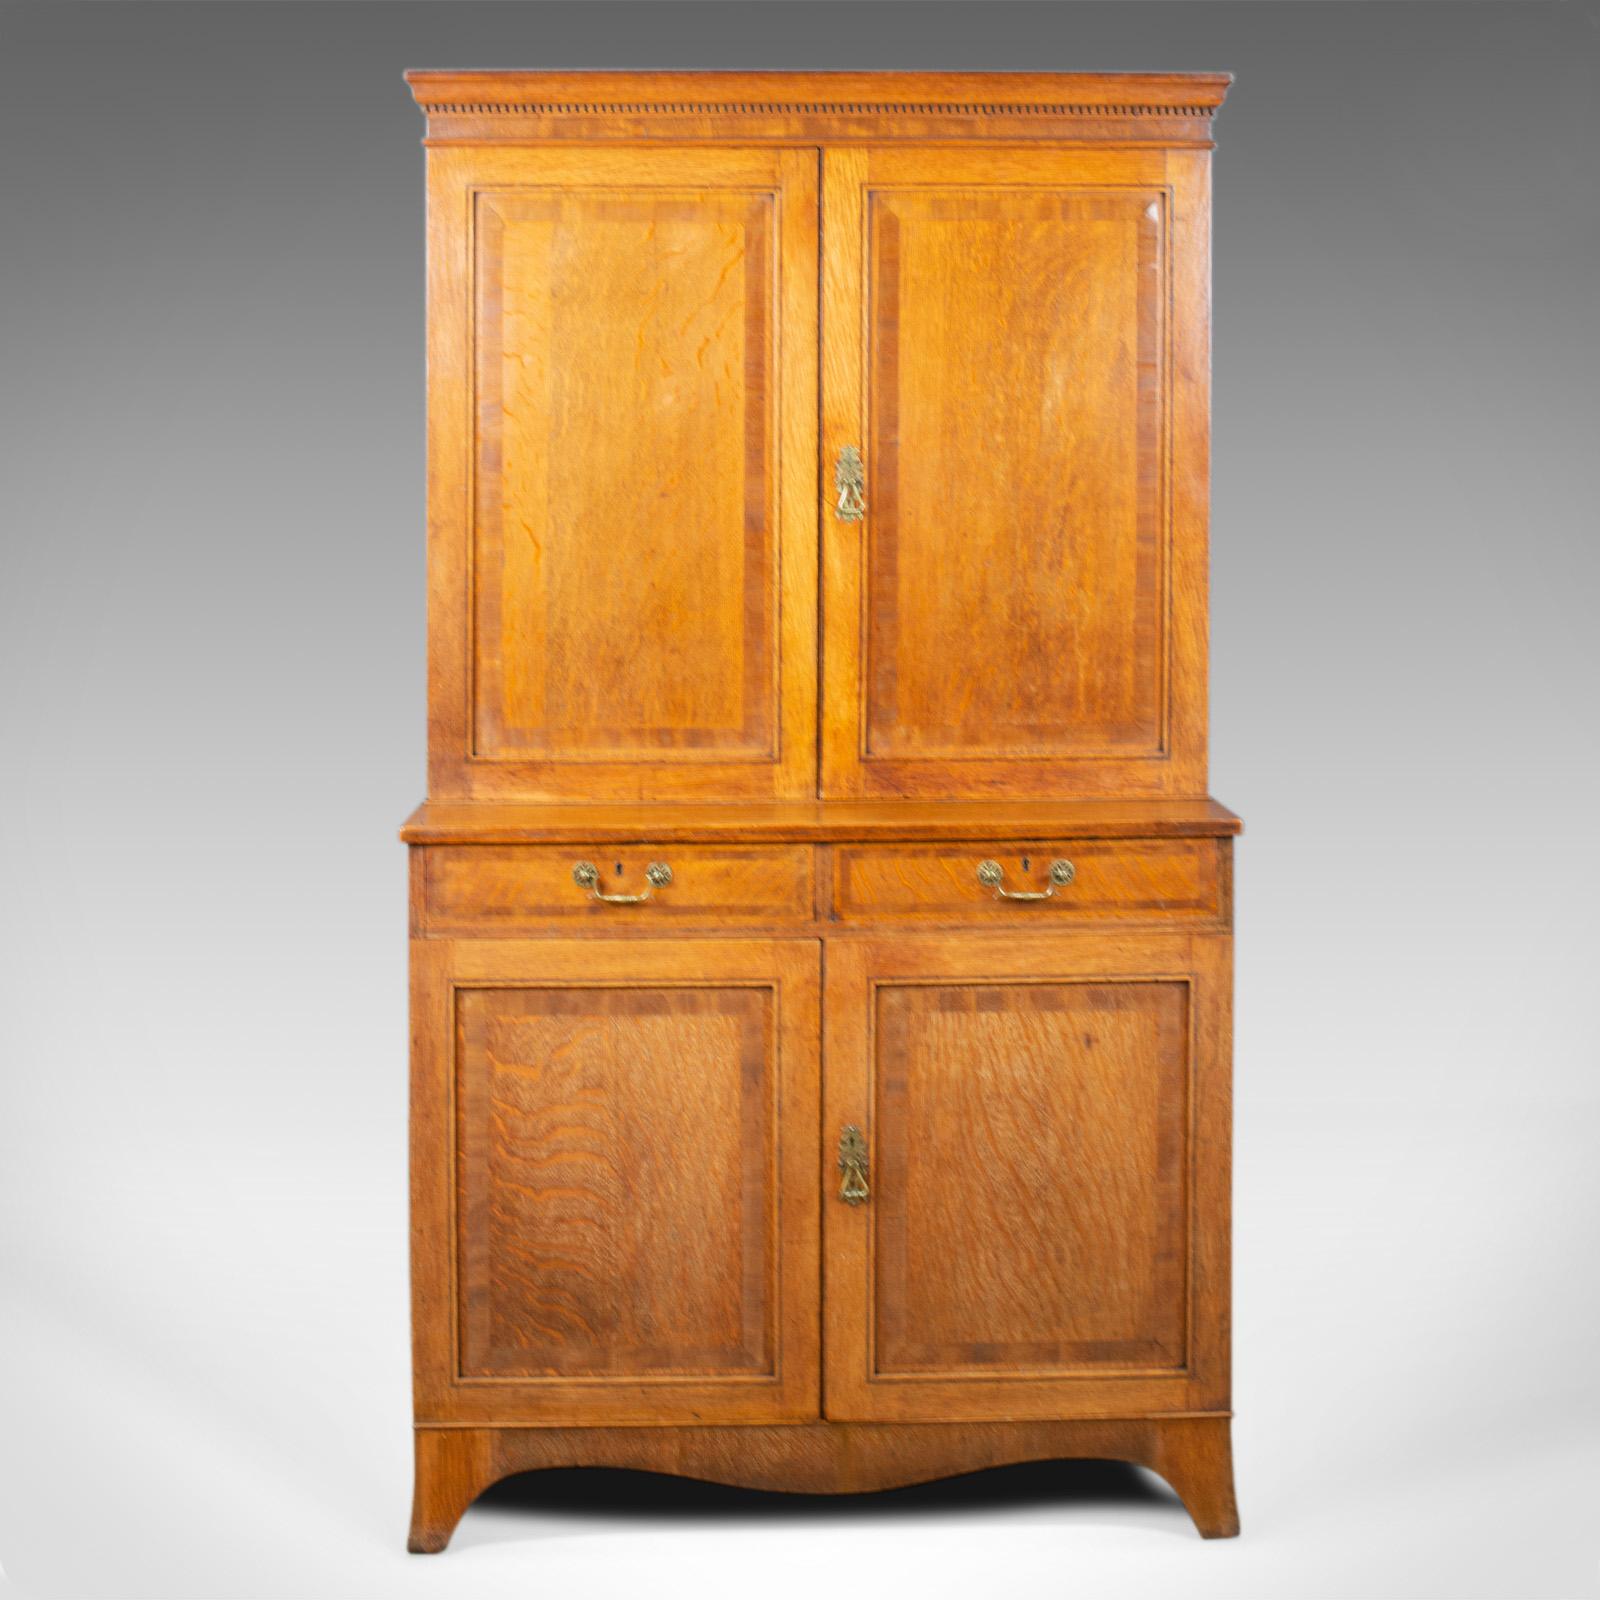 This is an antique estate cabinet. An English, Victorian, oak press cupboard dating to the late 19th century, circa 1890.

Attractive honey tones to the English oak 
Grain interest and a good consistent colour
Desirable aged patina in the wax